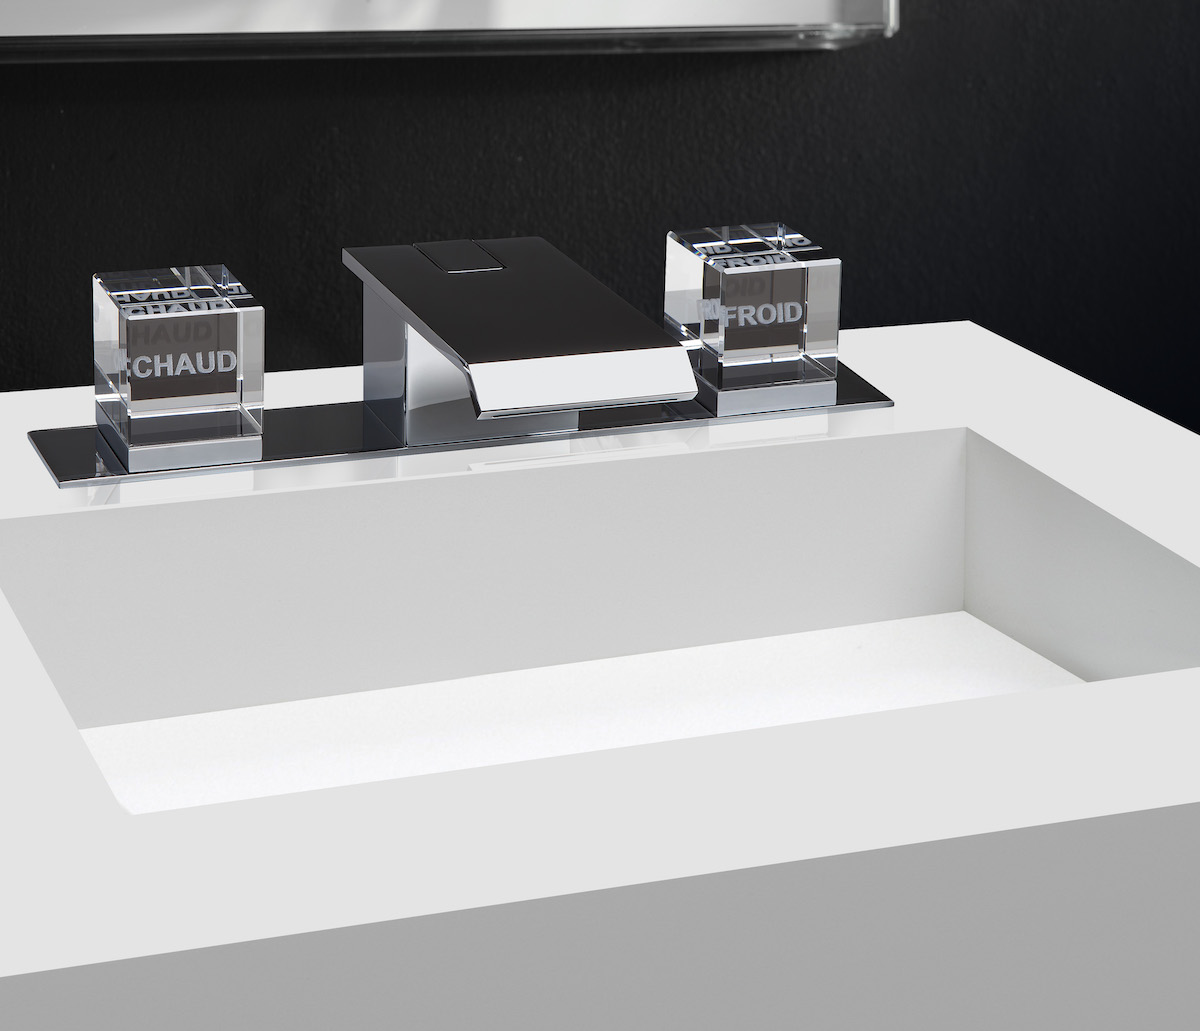 thg paris faucet and bathroom fittings only at the immerse designer showroom